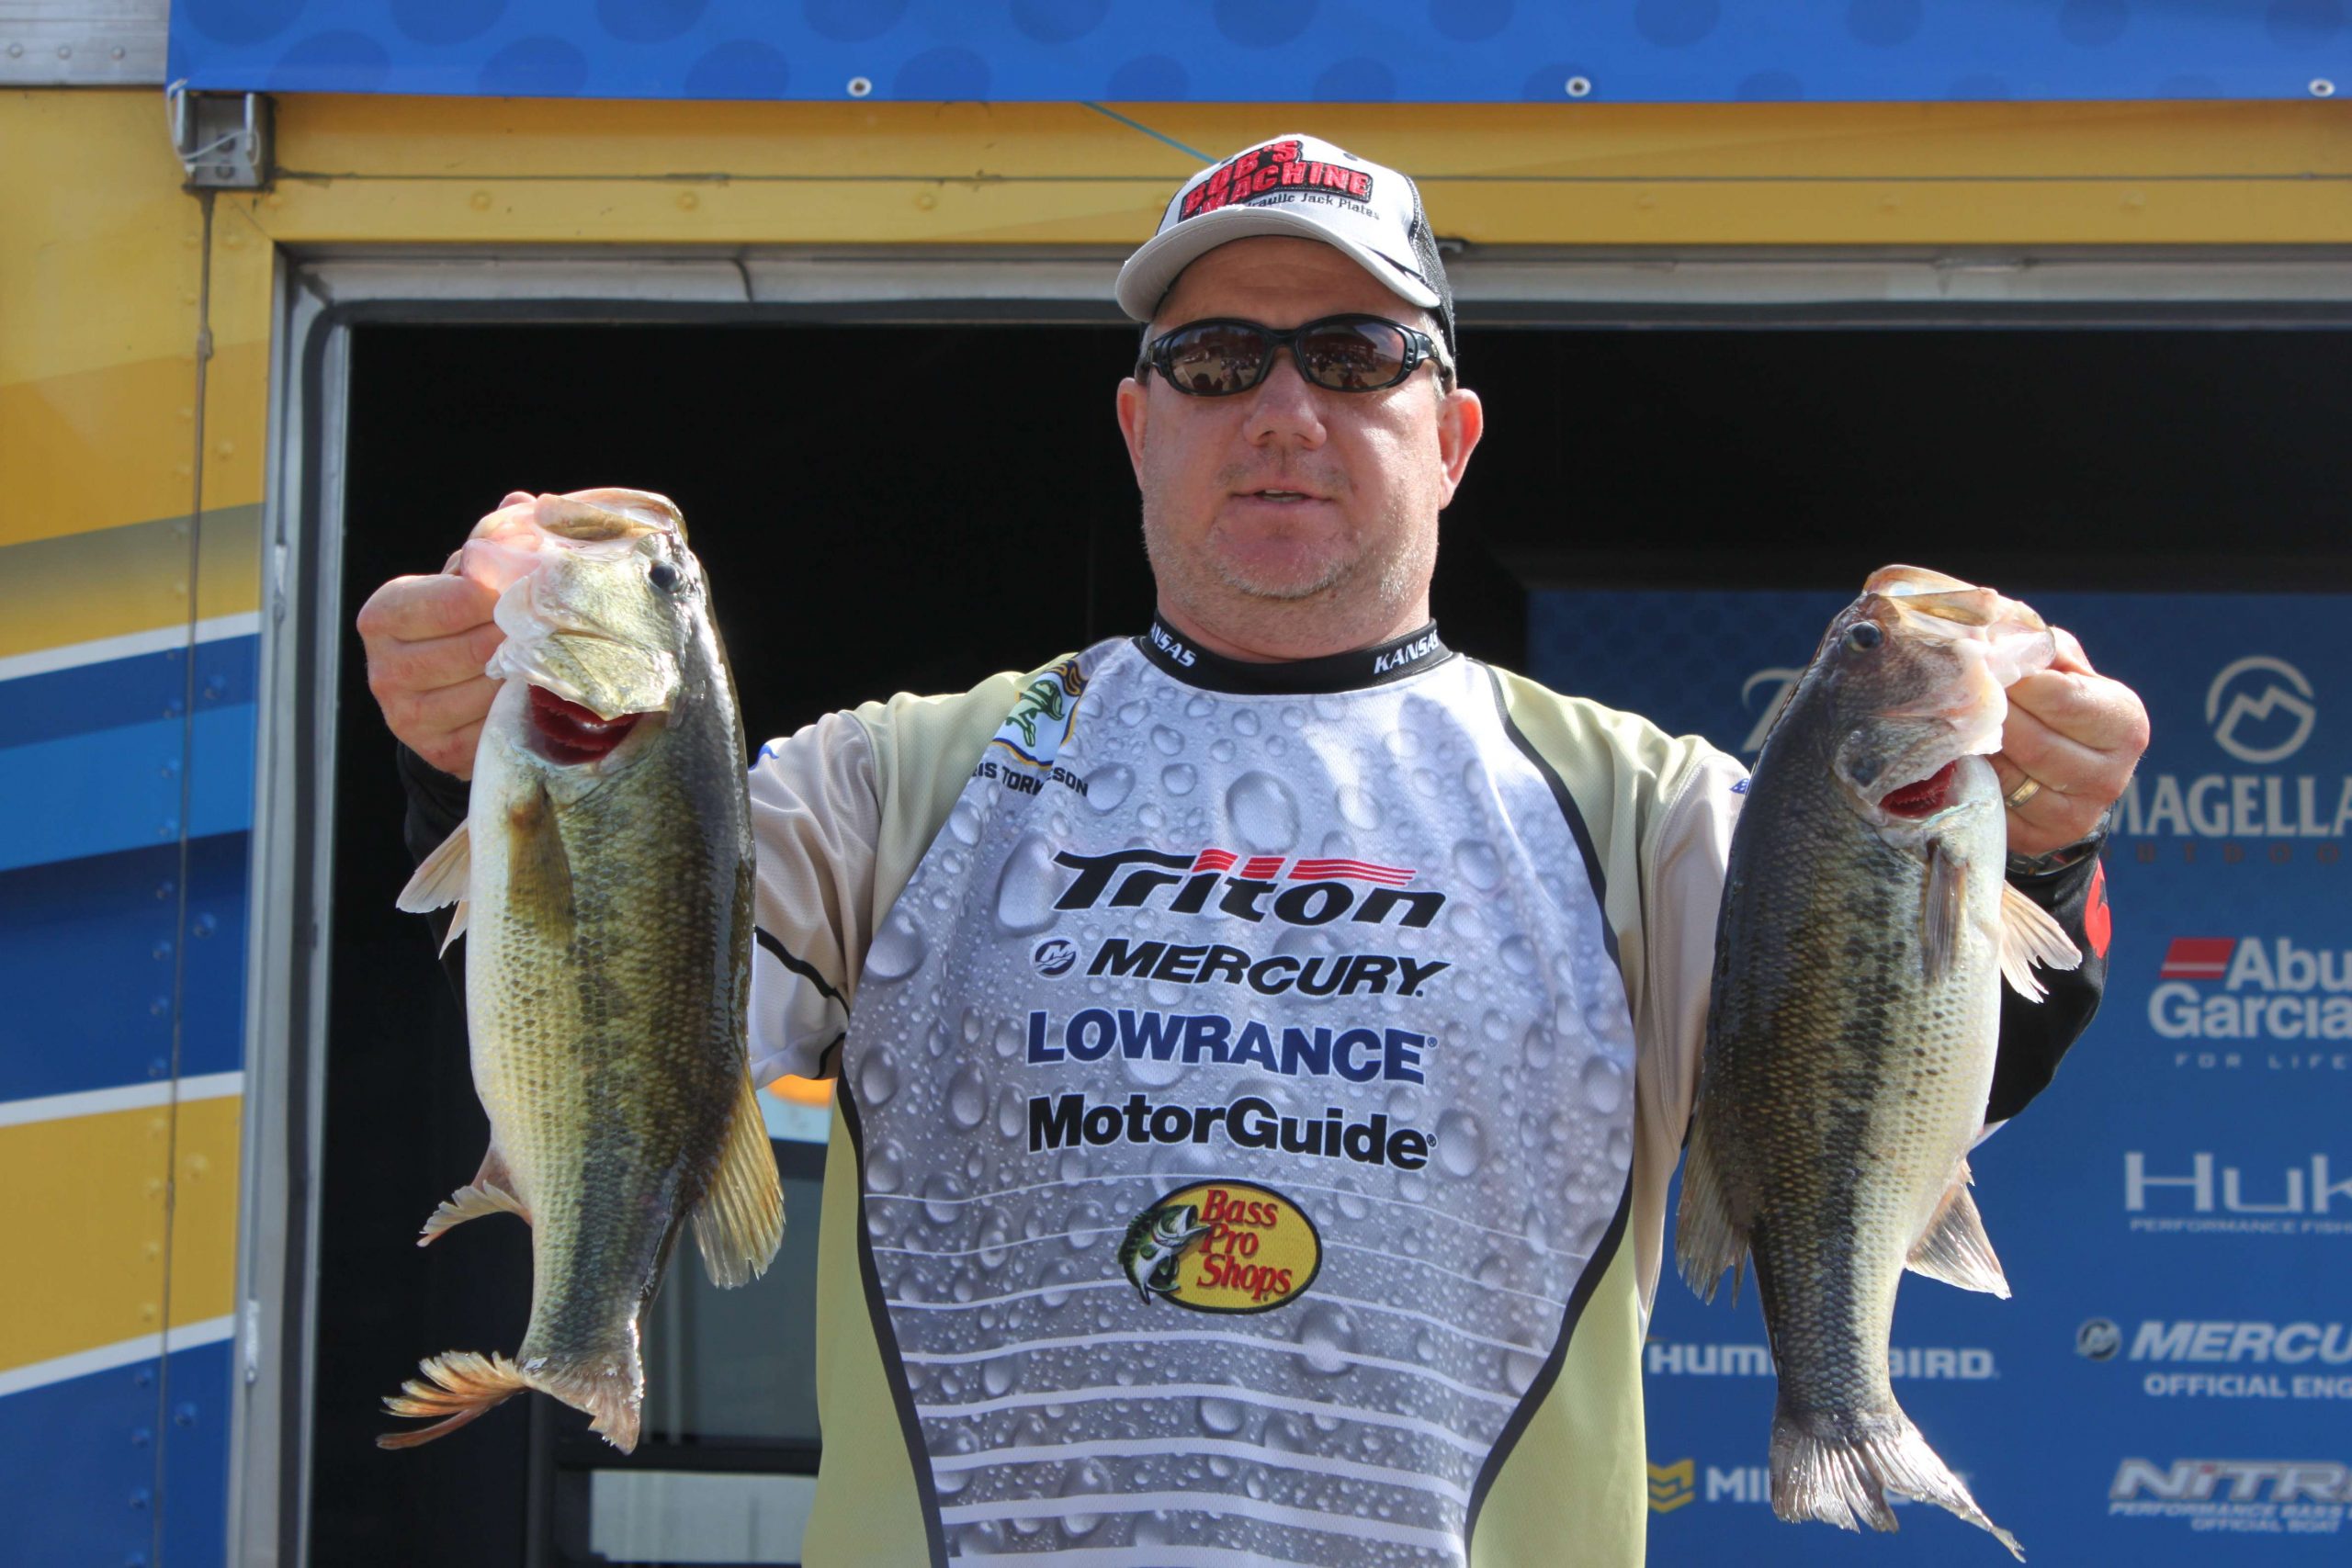 Team Kansas' Chris Torkelson is in 21st place in the boater division with 29-5 over two days.
